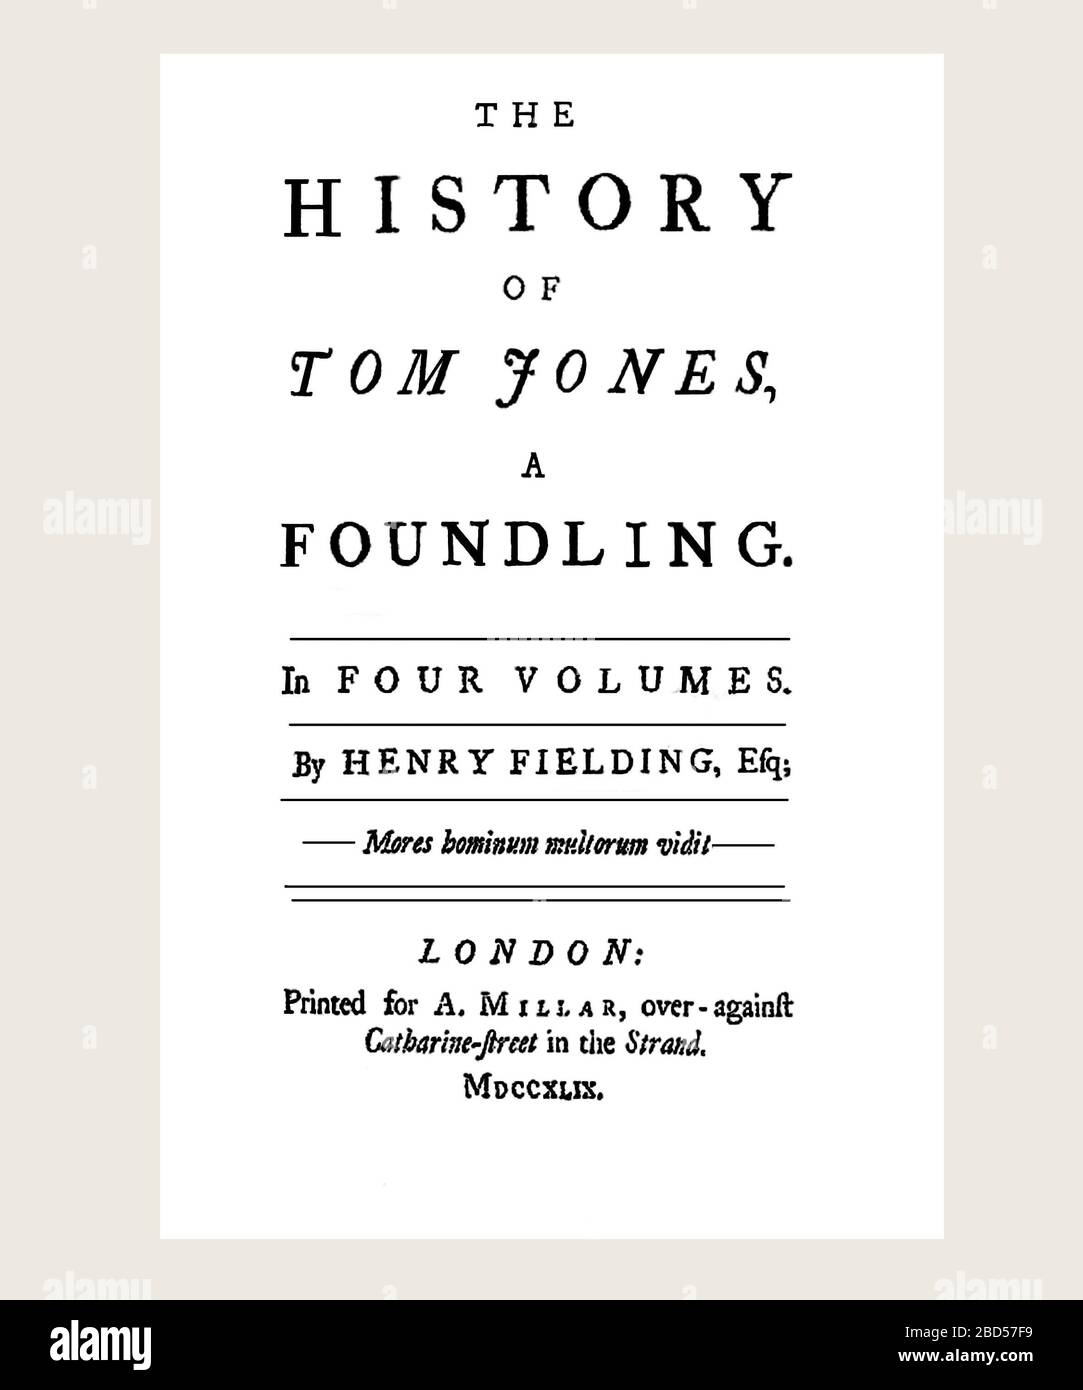 Henry Fielding The History of Tom Jones Title Page Refreshed and Reset Foto Stock